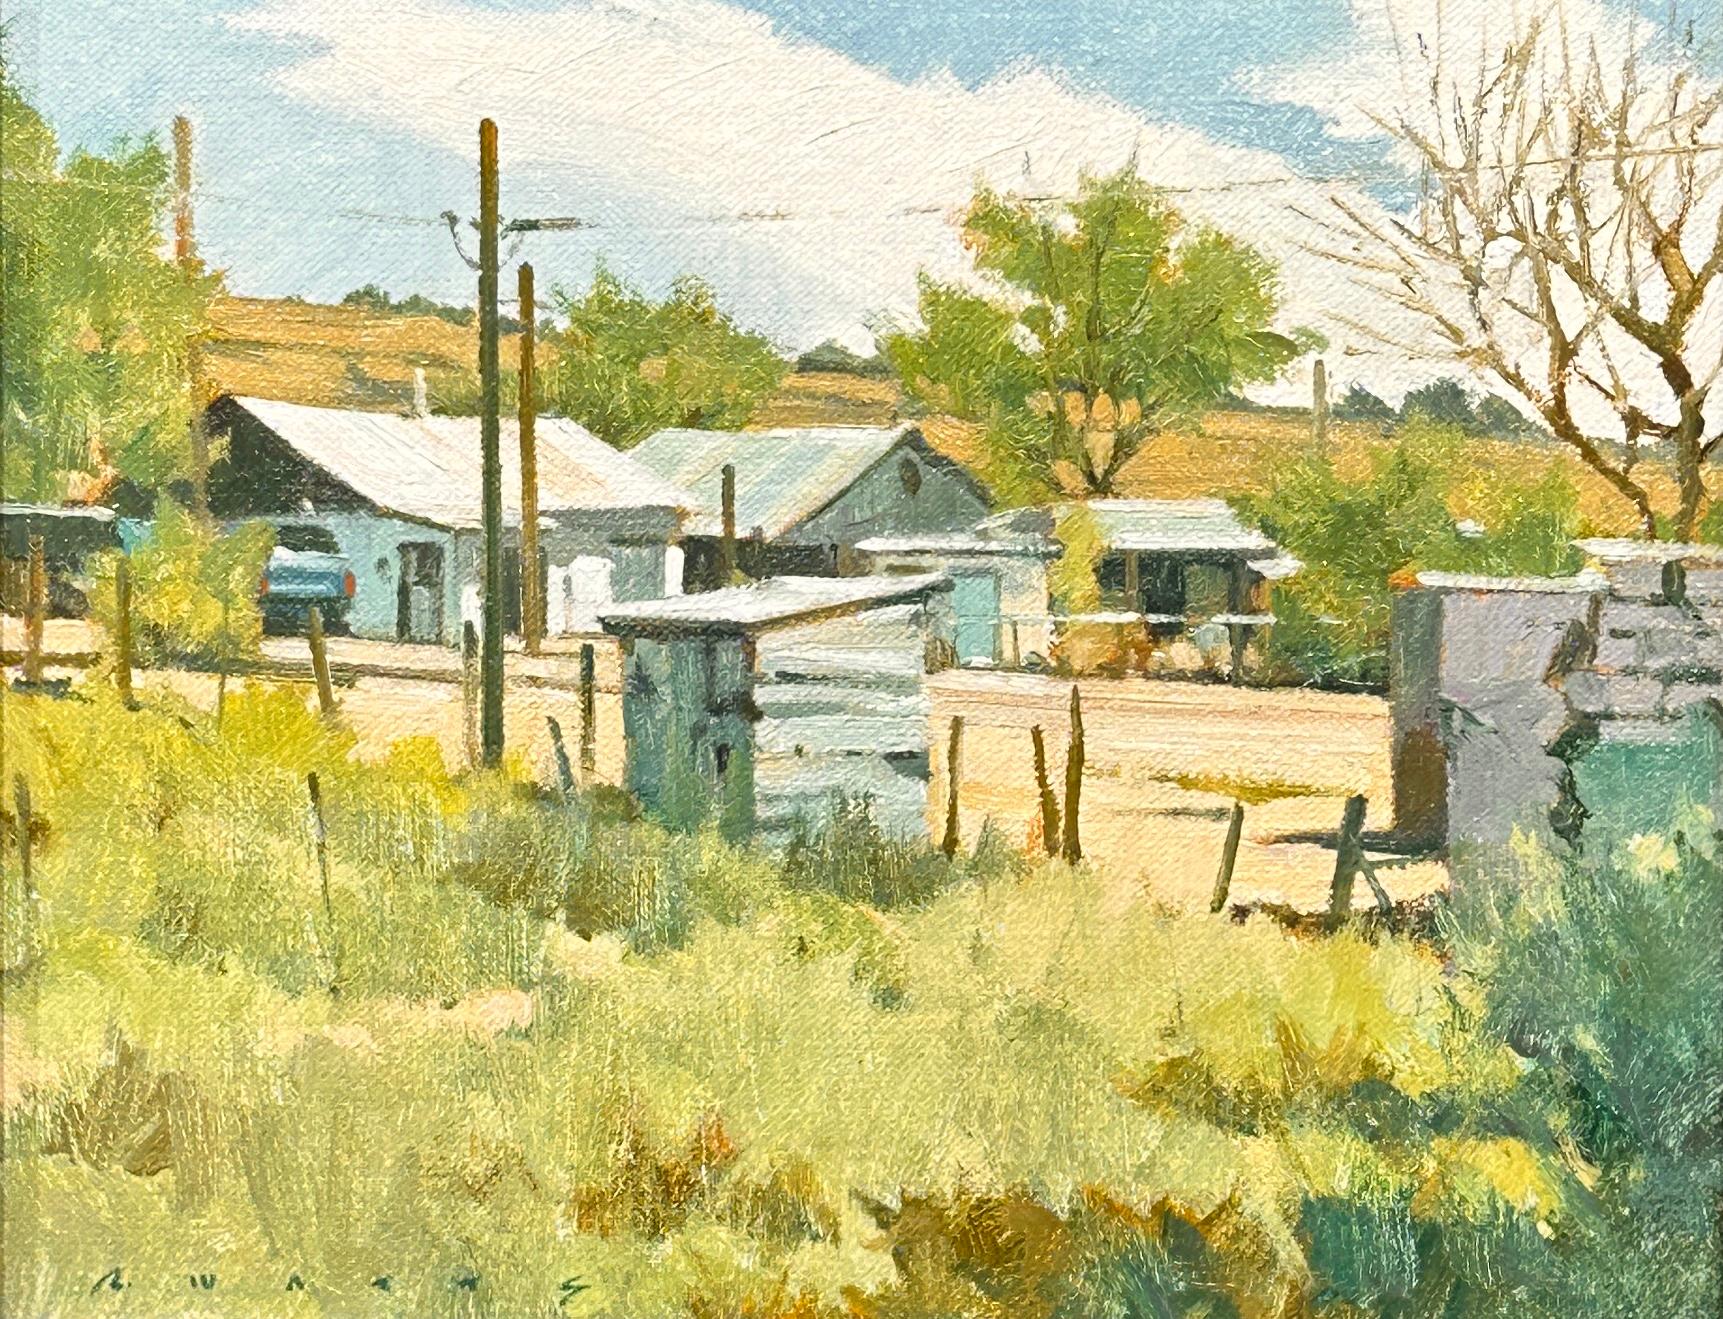 "Roadside New Mexico" - Landscape, New Mexico by renowned painter